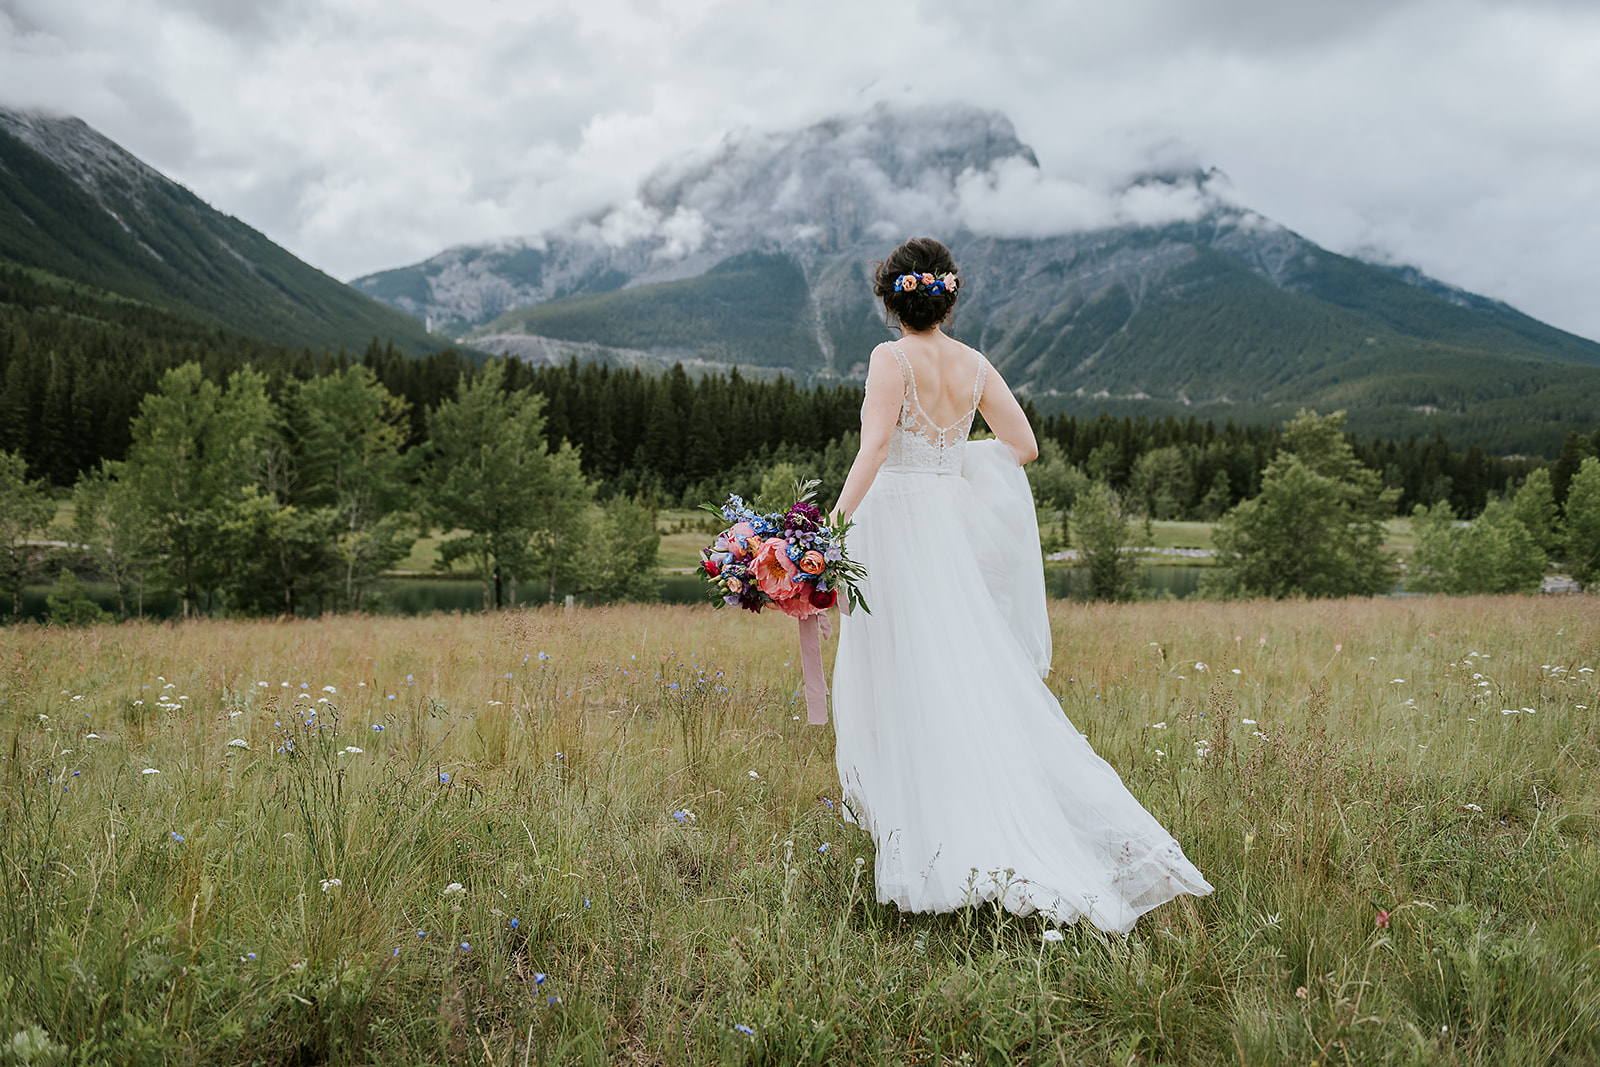 Intimate Mountaintop Wedding in Canmore With Colourful Wildflowers & Glasses of Bubbly for Each Guest - Micro Wedding Featured on Brontë Bride